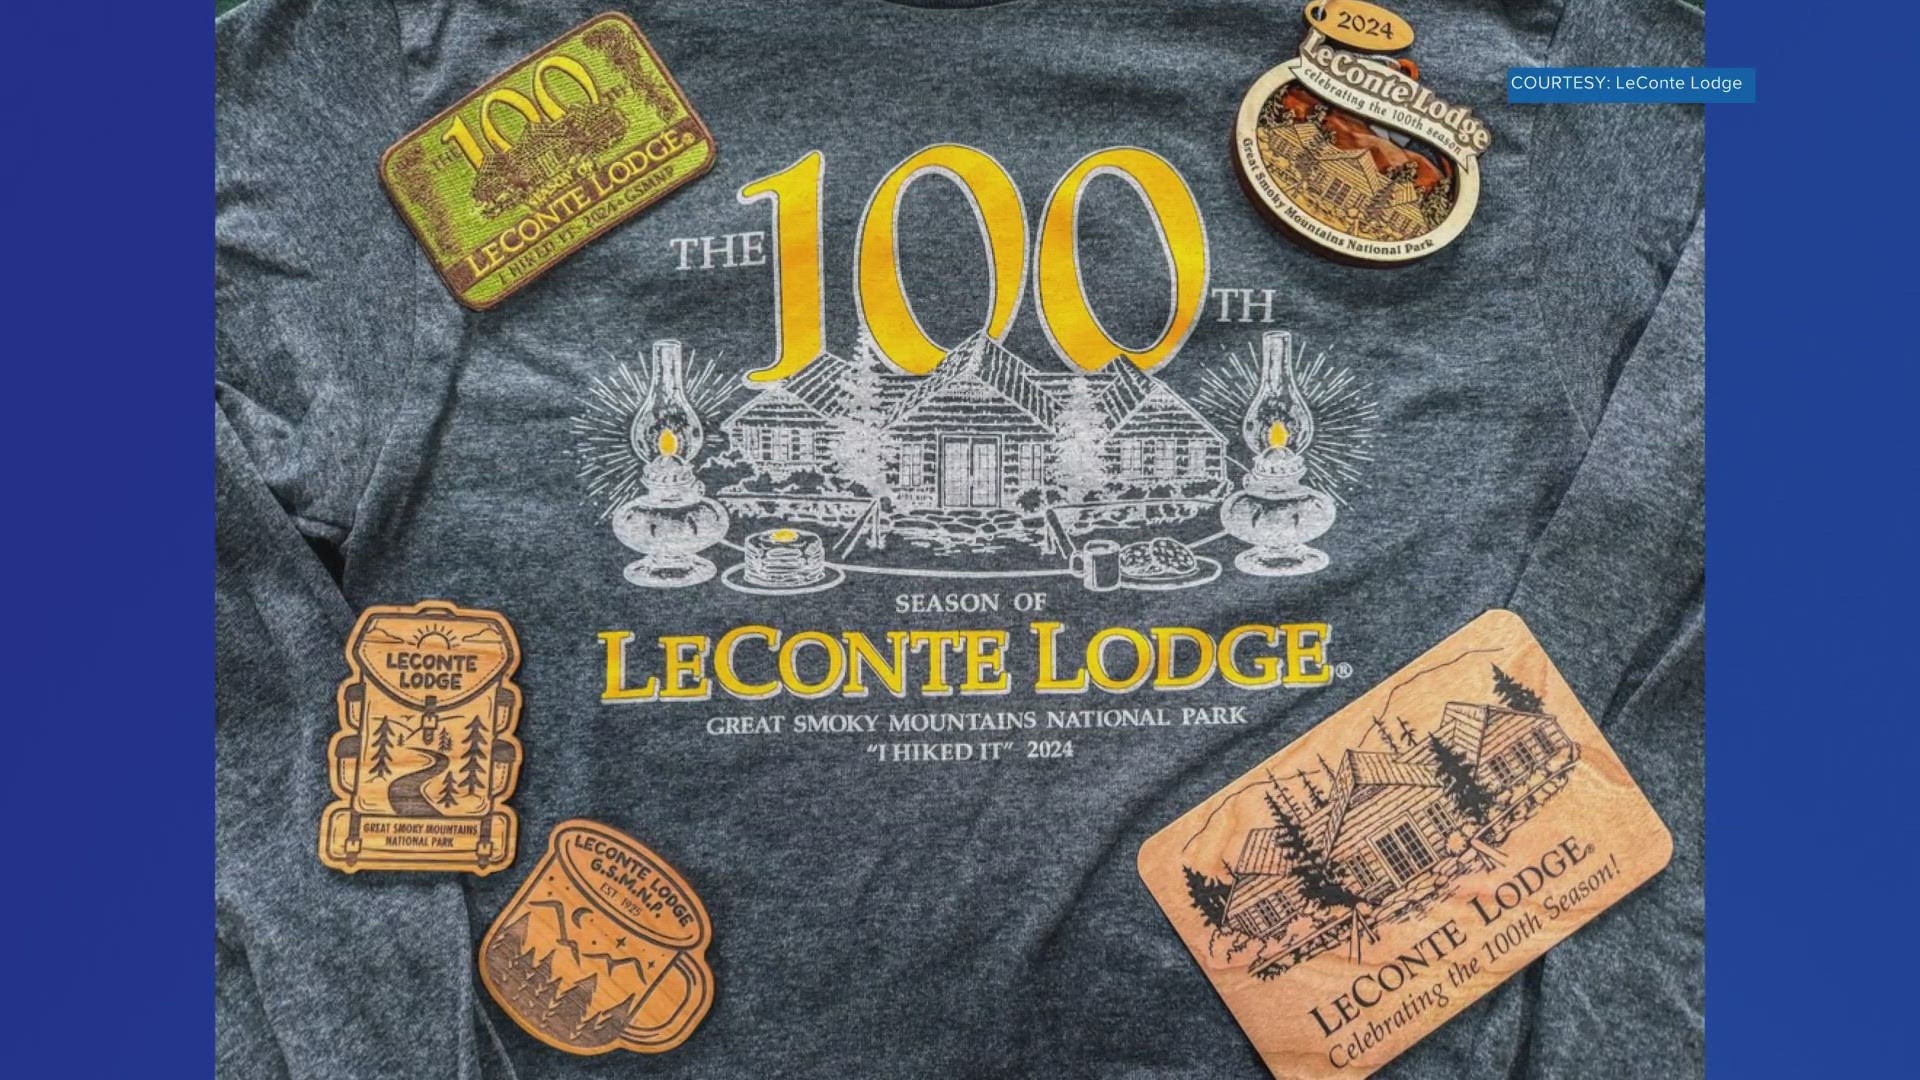 The lodge is on the highest peak in Tennessee. It sits at 6,360 feet on the peak of Mt. LeConte.